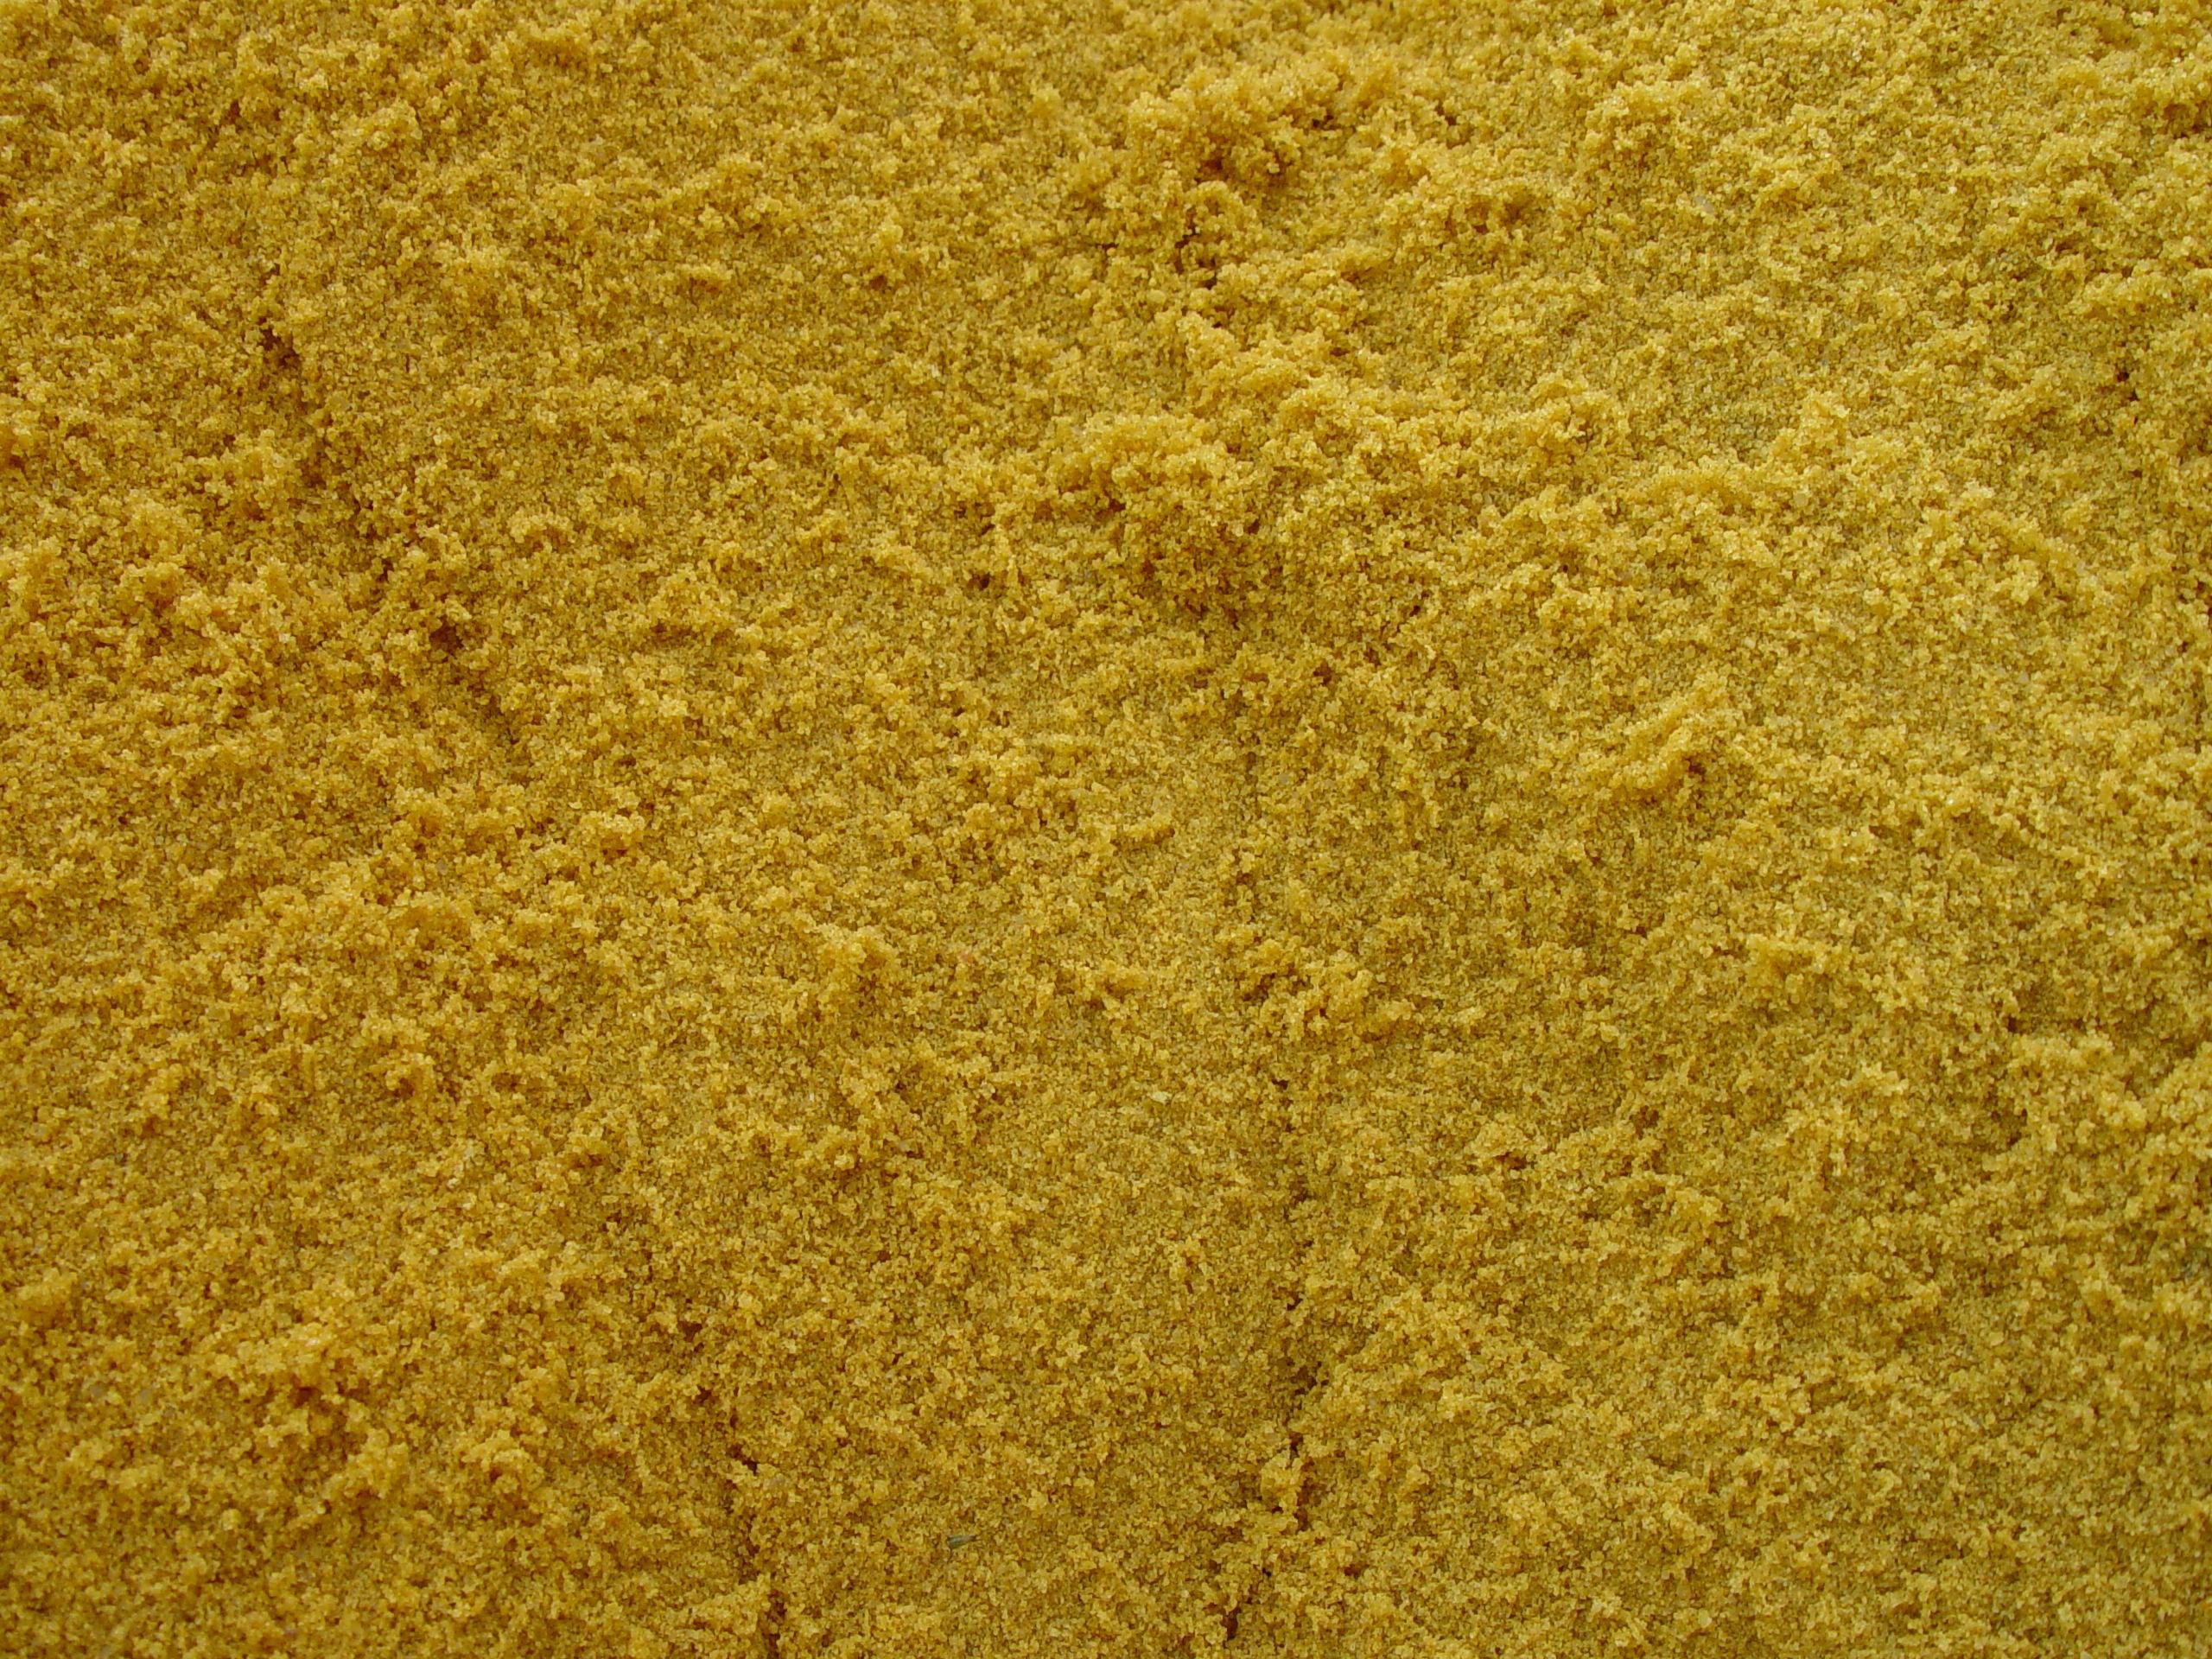 texture, sand, download photo, yellow sand